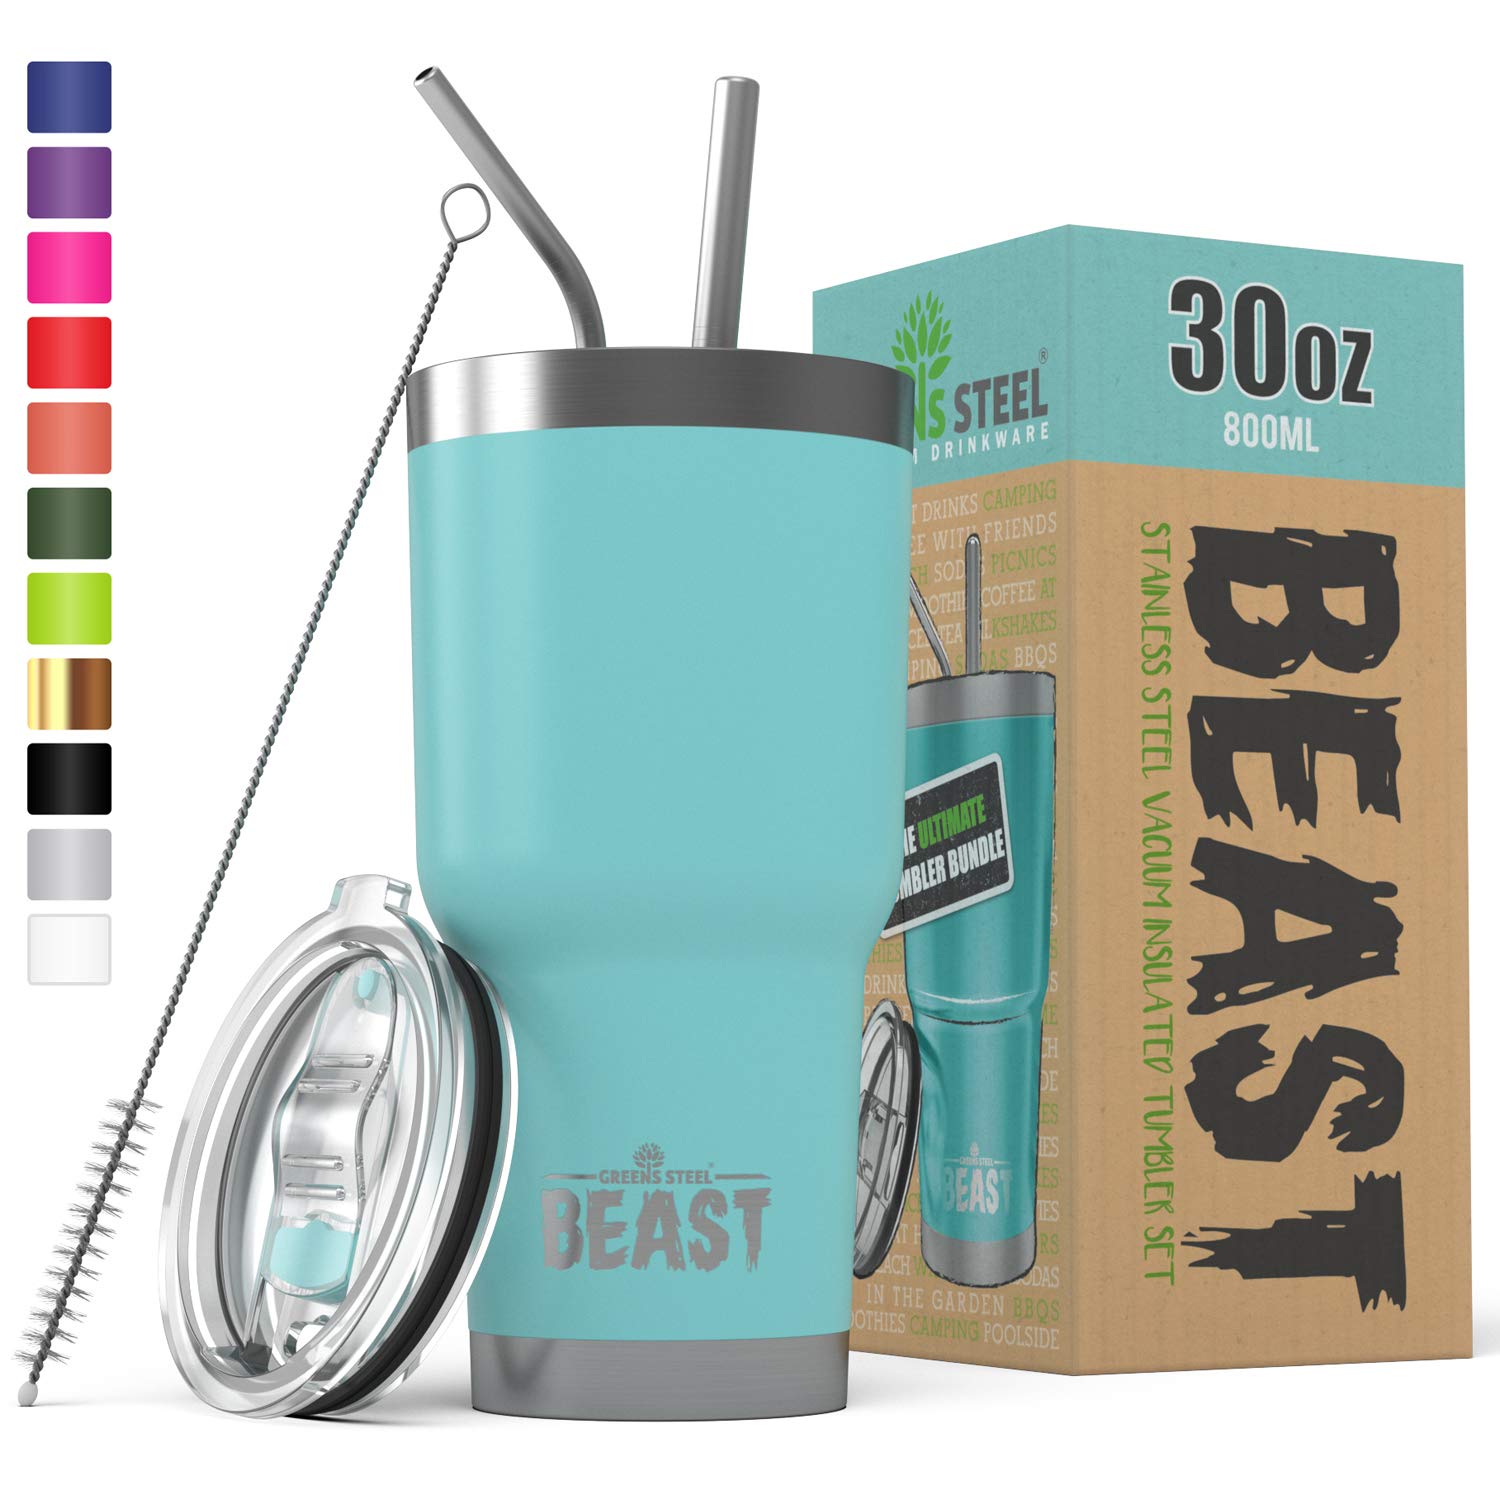 BEAST 30 oz Teal Tumbler Stainless Steel Insulated Coffee Cup with Lid, 2 Straws, Brush & Gift Box by Greens Steel (30oz, Aquamarine Blue)